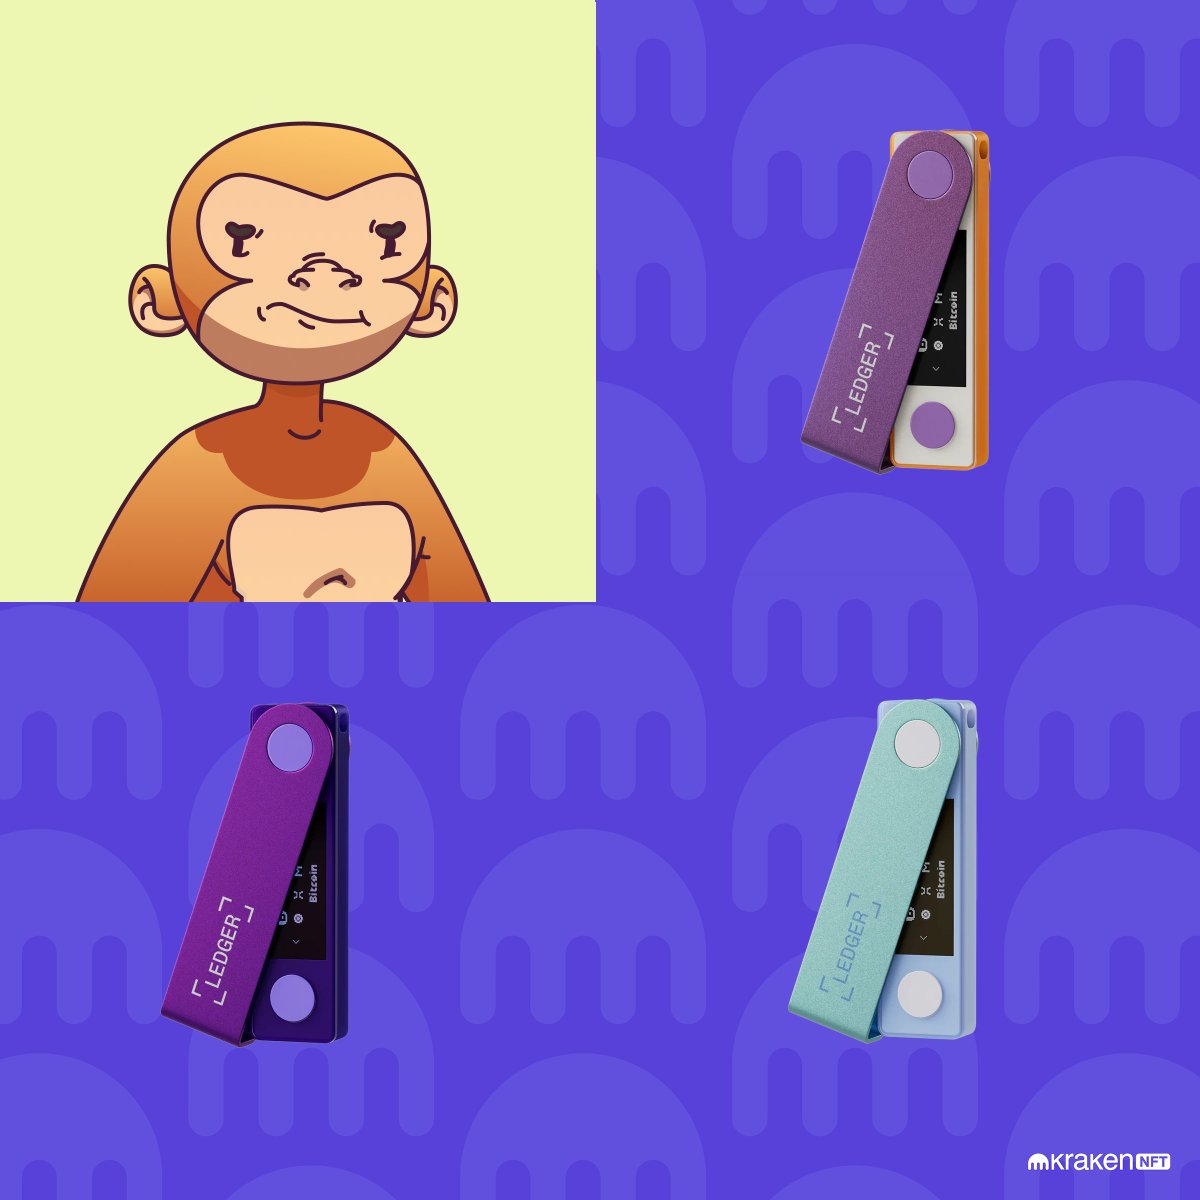 ⌛Less than 24 hours remain on the Rear Wing Takeover contest! 🏆 So we are giving away this grail Ape and 2 @Ledger Nano Xs! 🎁 📝To enter: 1) Like & Repost the Quoted Post from @KrakenNFT 2) Comment #apish on the Quoted Post 3) Like this post & tag 3 friends